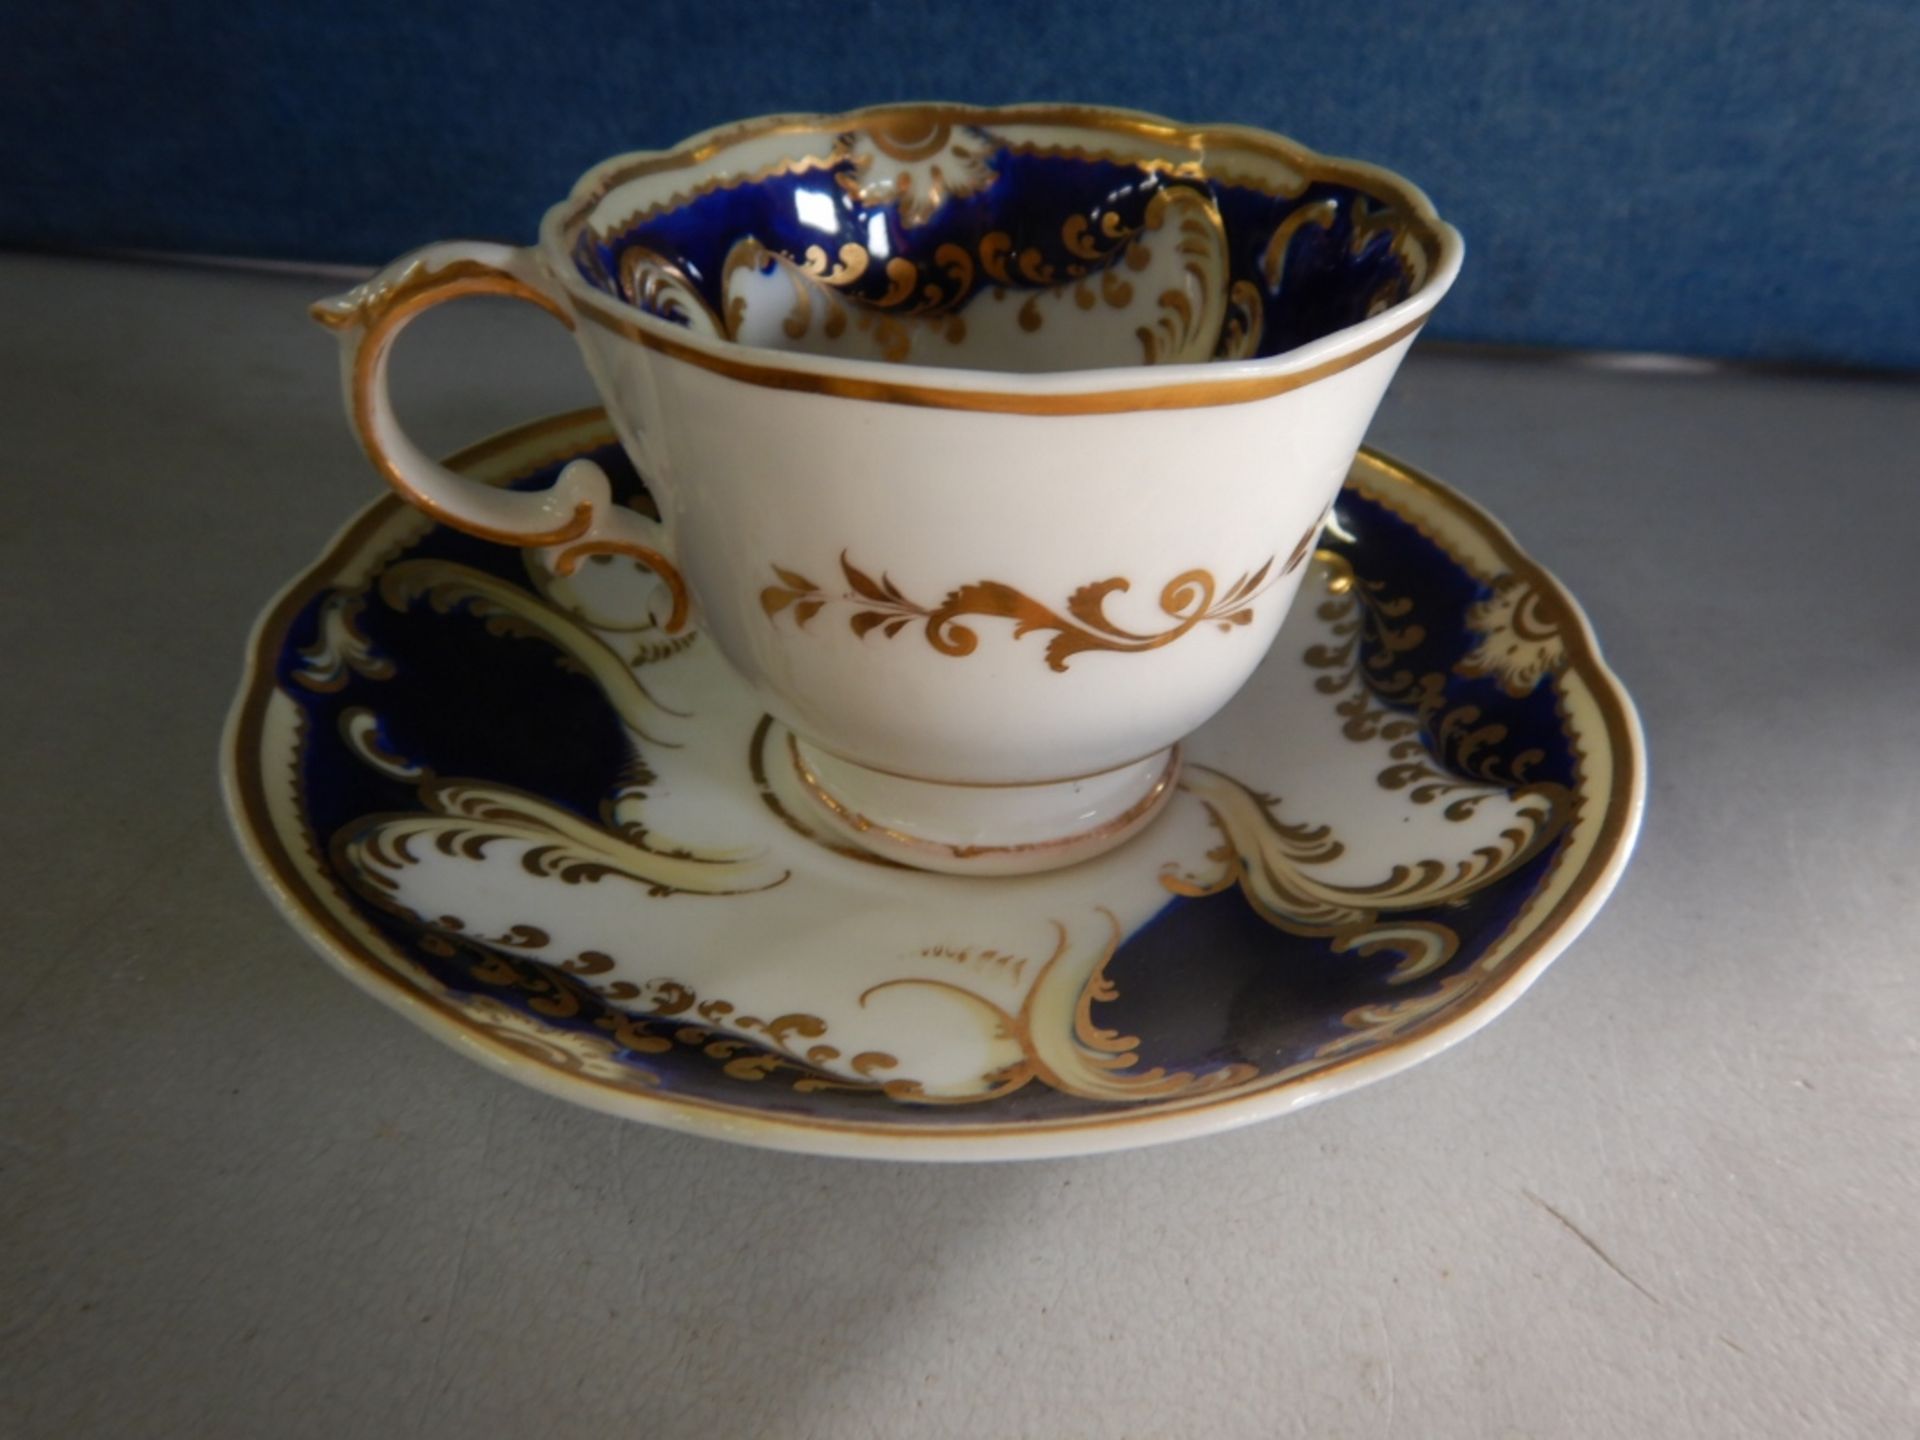 ANTIQUE TEACUP & SAUCER - FINE CHINA - VERY OLD #166/10 - Image 2 of 5